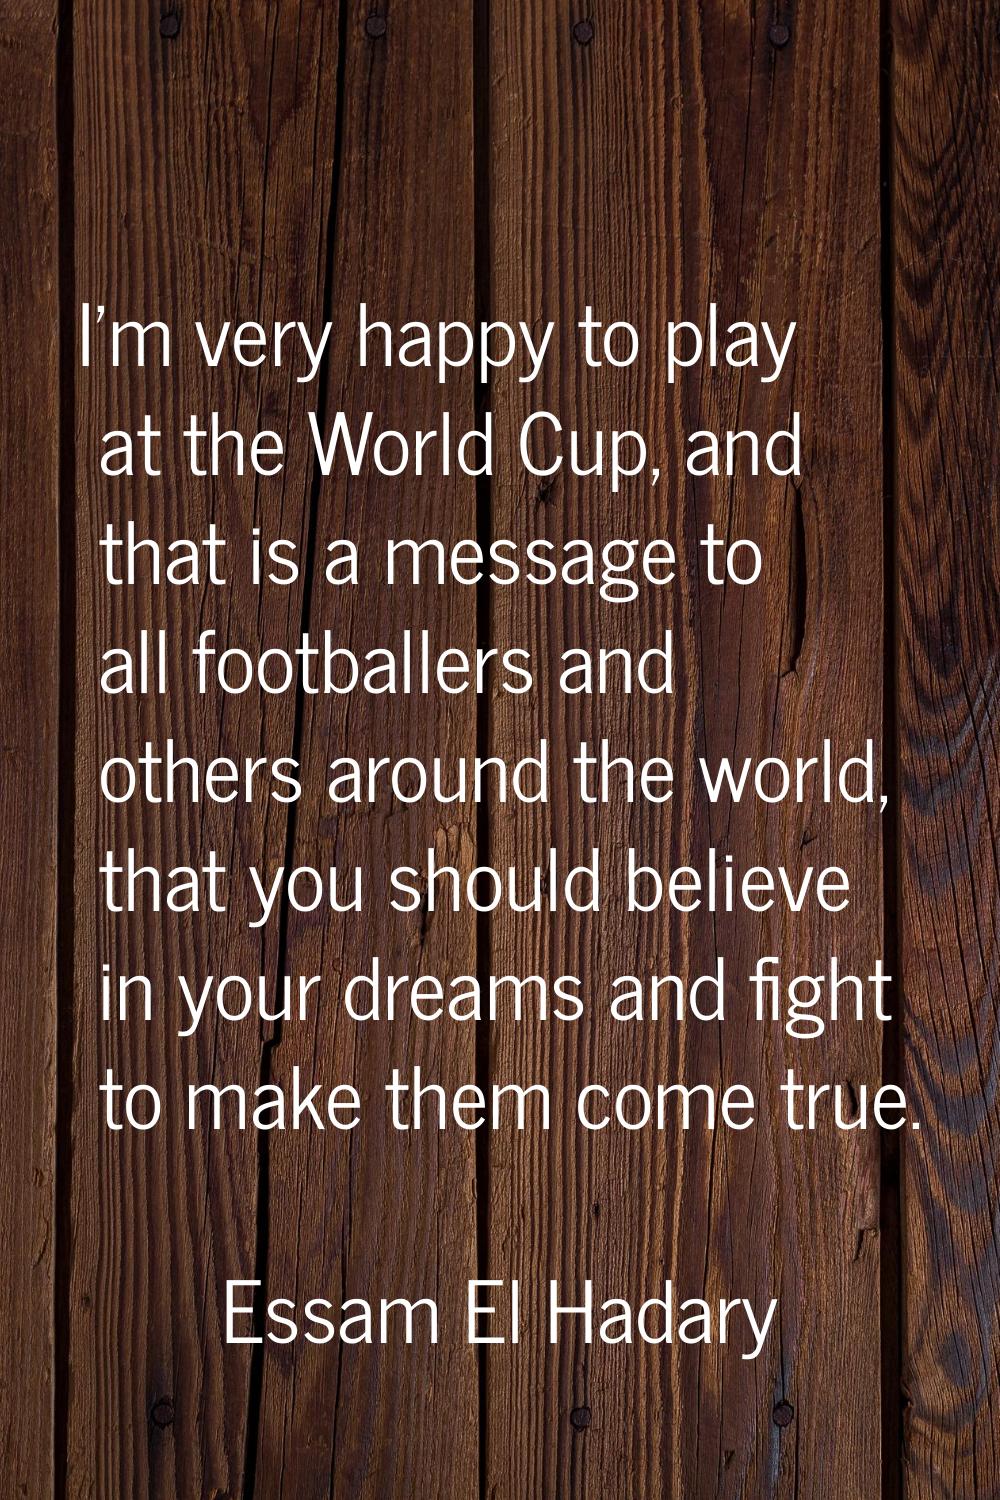 I'm very happy to play at the World Cup, and that is a message to all footballers and others around